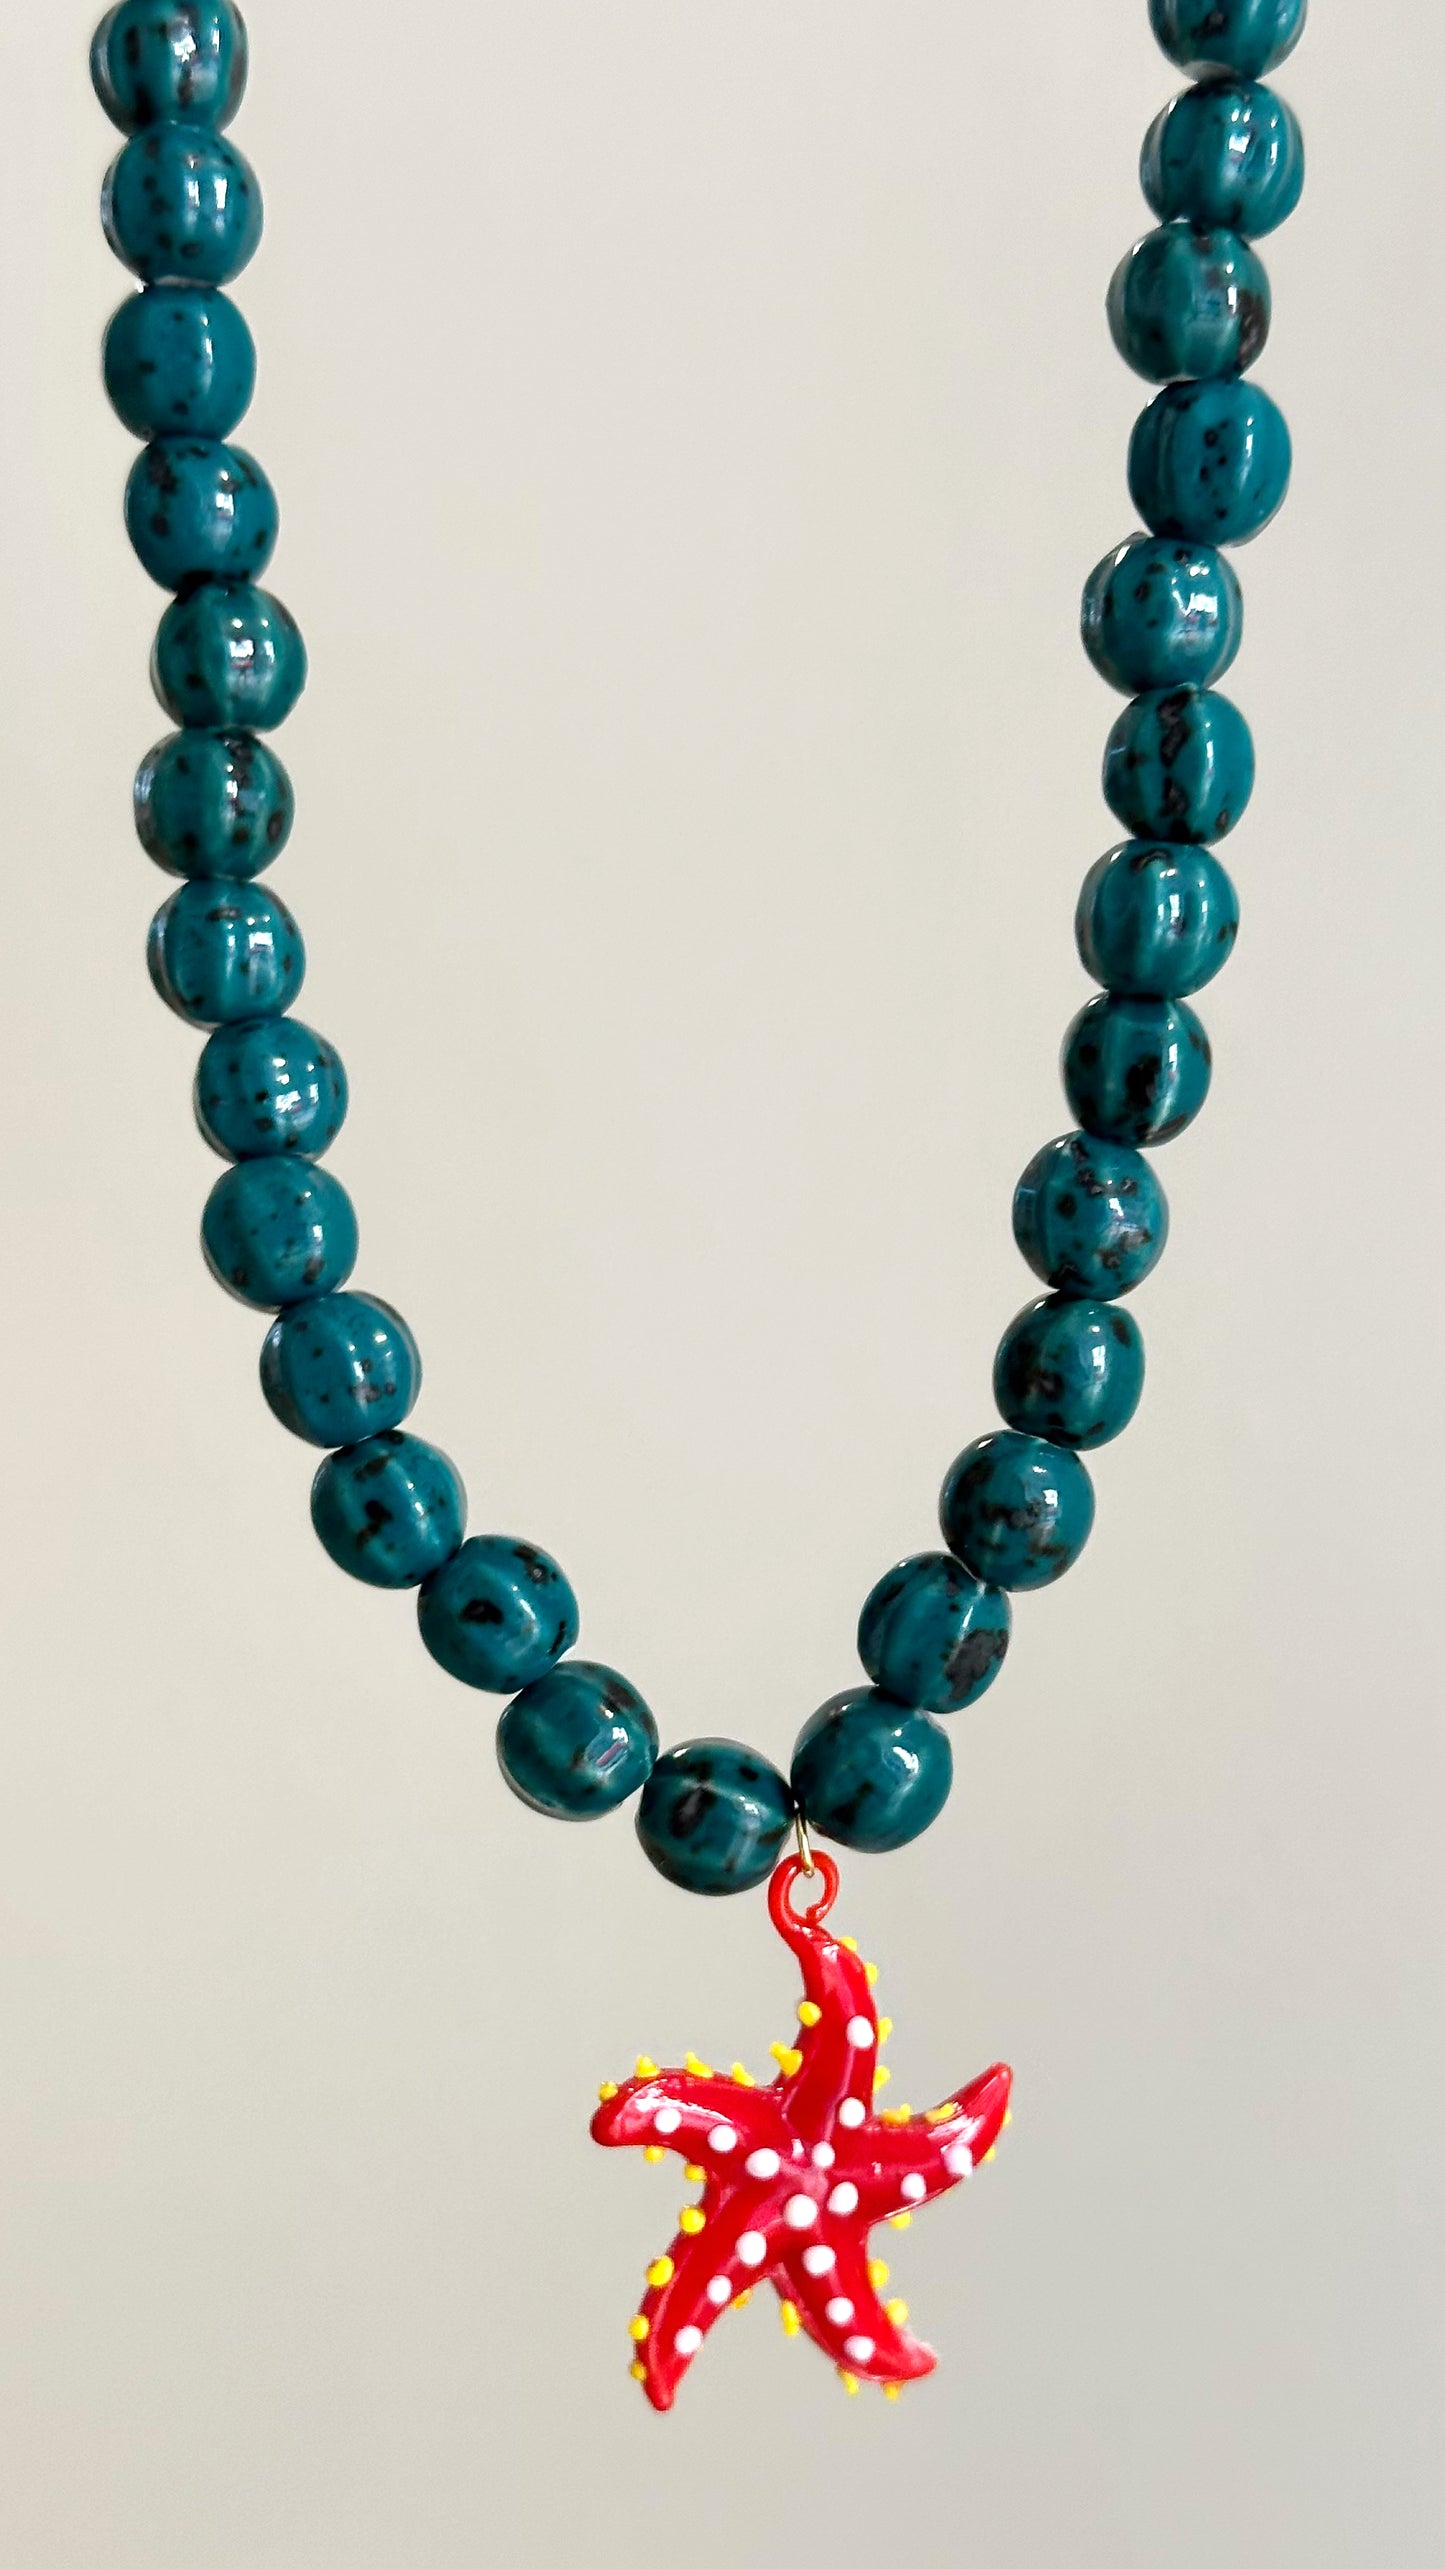 Red and blue patrician necklace